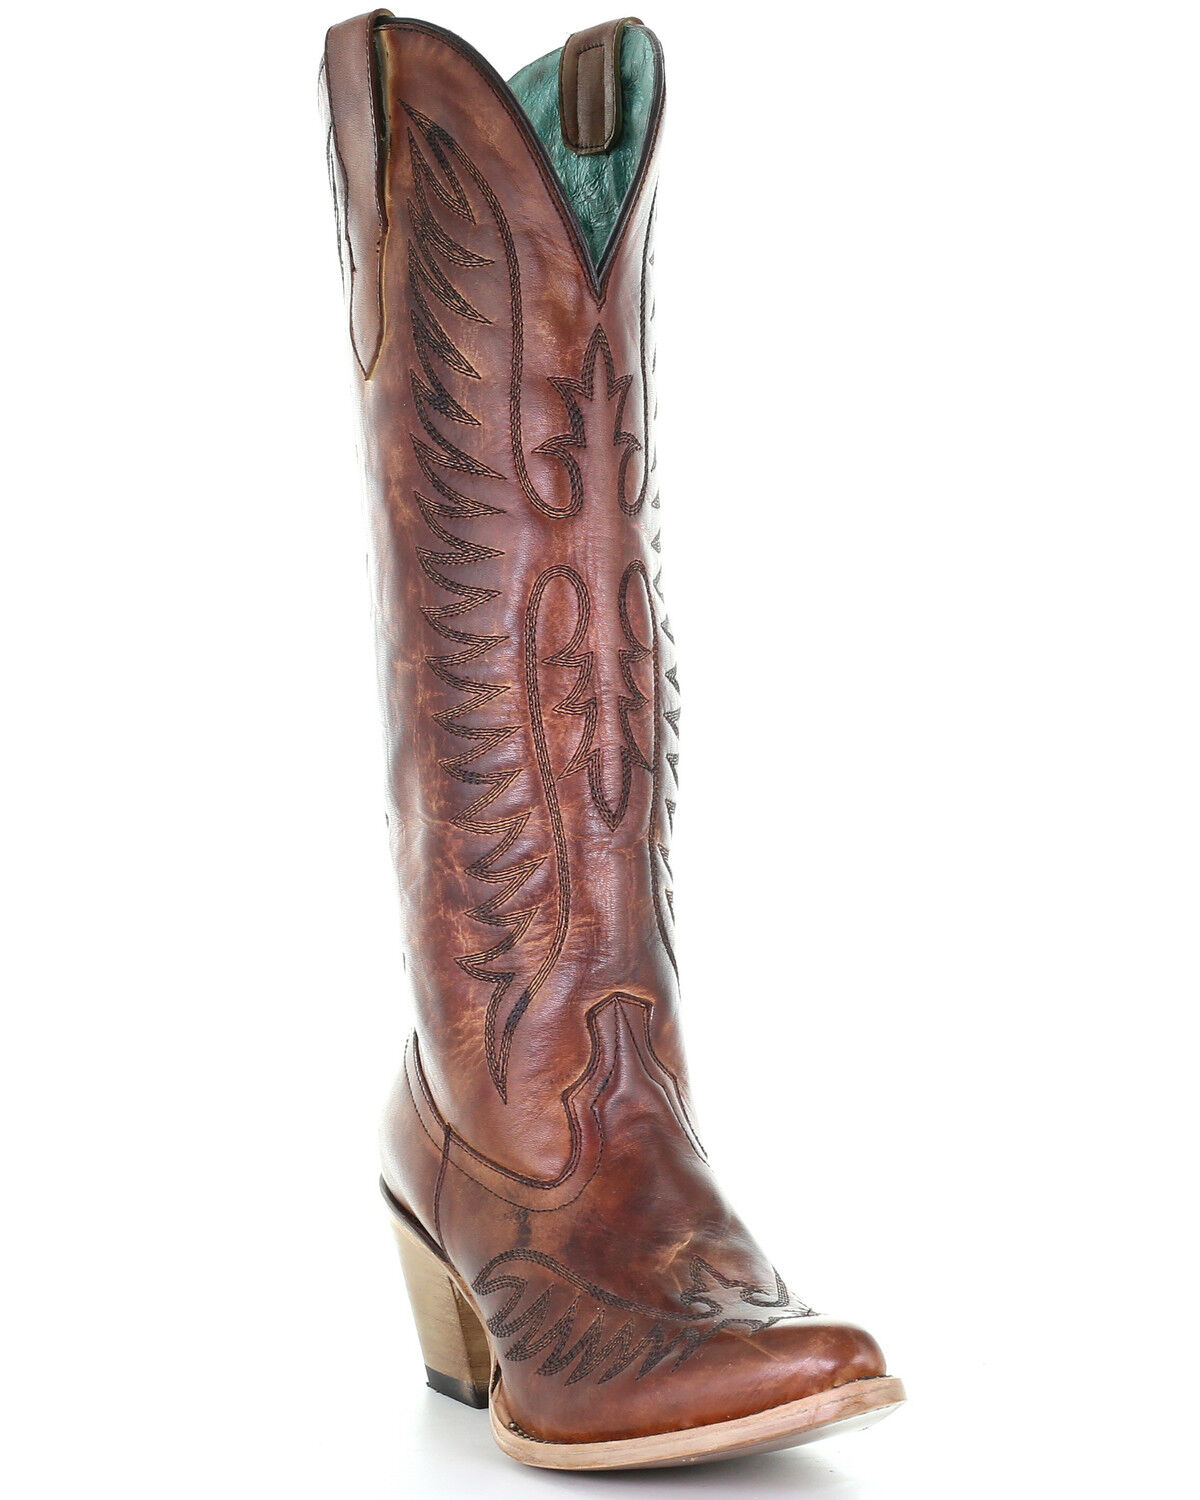 corral women's embroidered boots